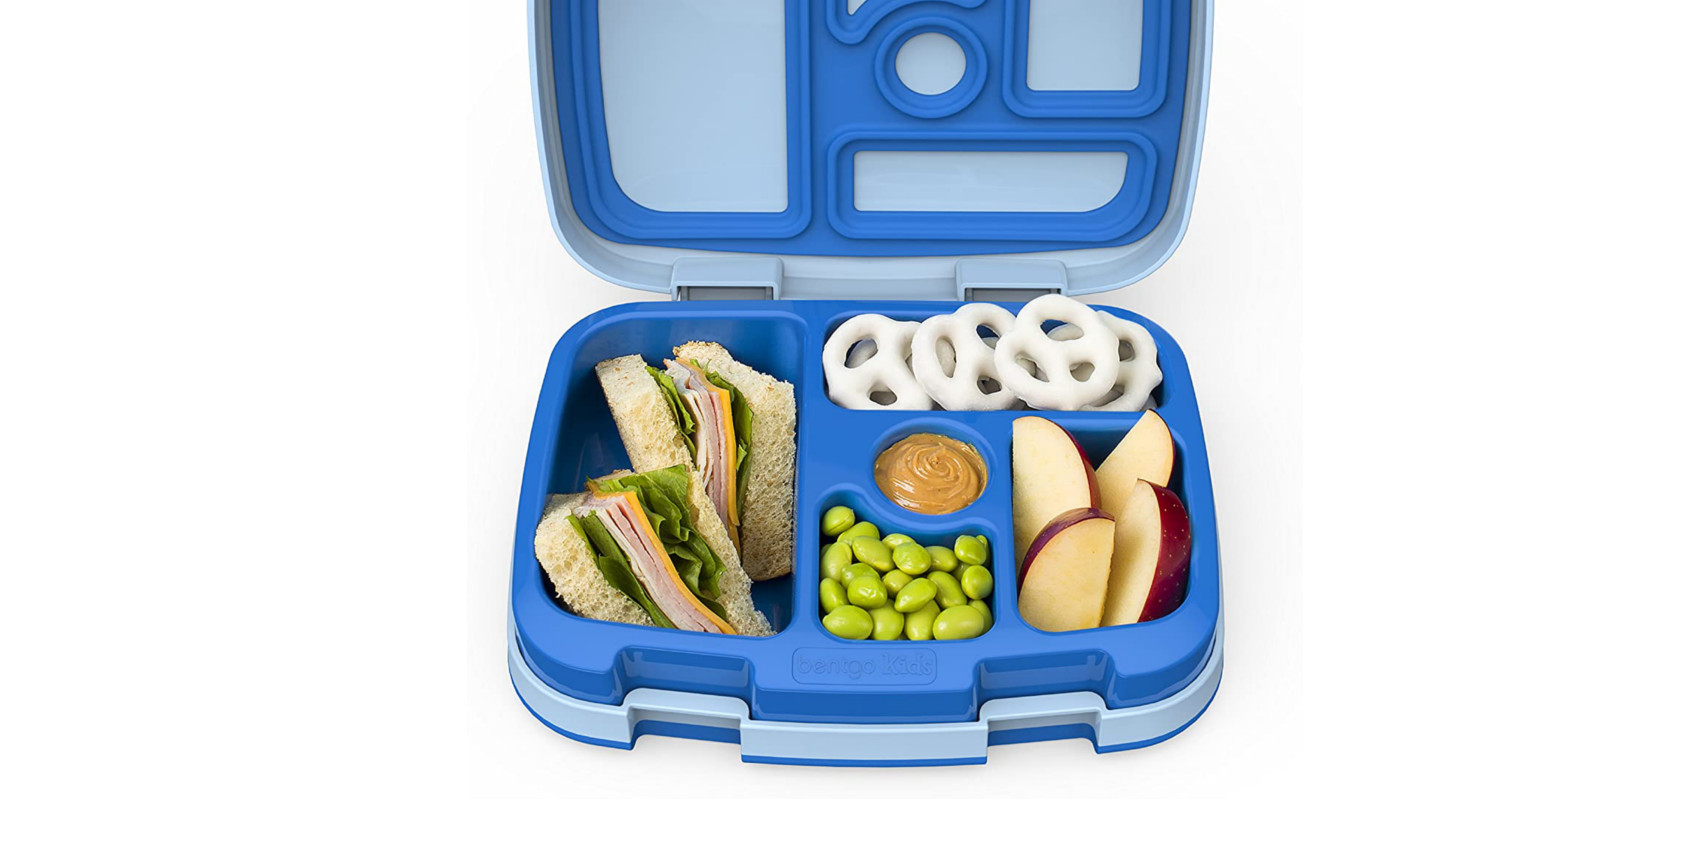 Gold Box Bentgo lunch box sale from $12, kids and adult options up